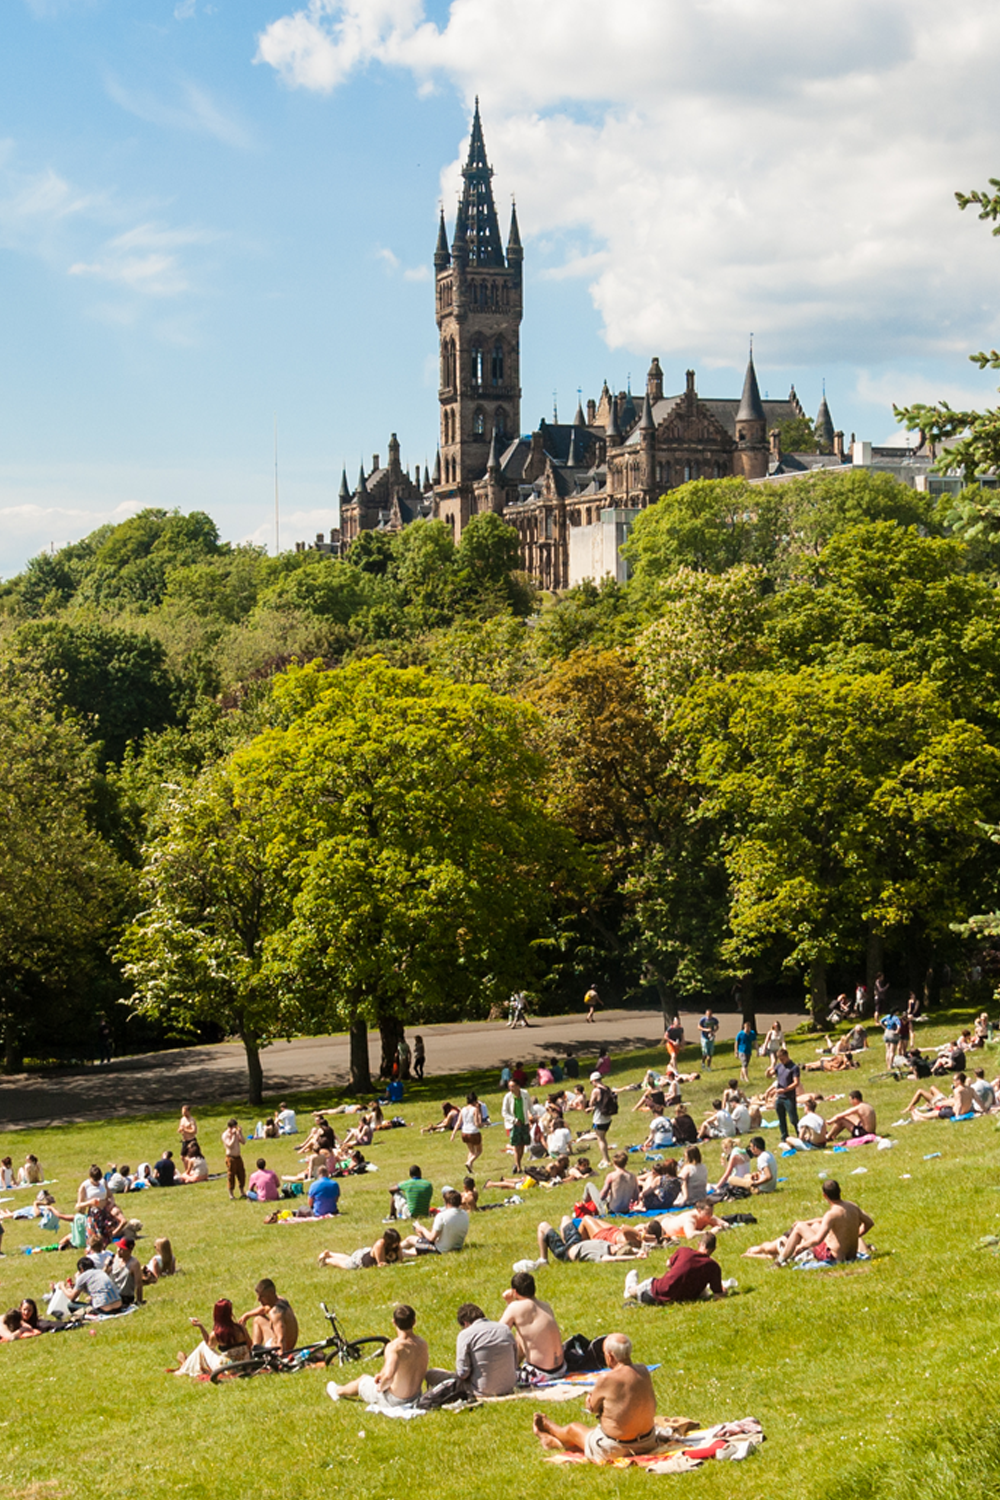 View of Kelvingrove Park full of people enjoying the Scottish summer with the main building of Glasgow University on the top of the hill.